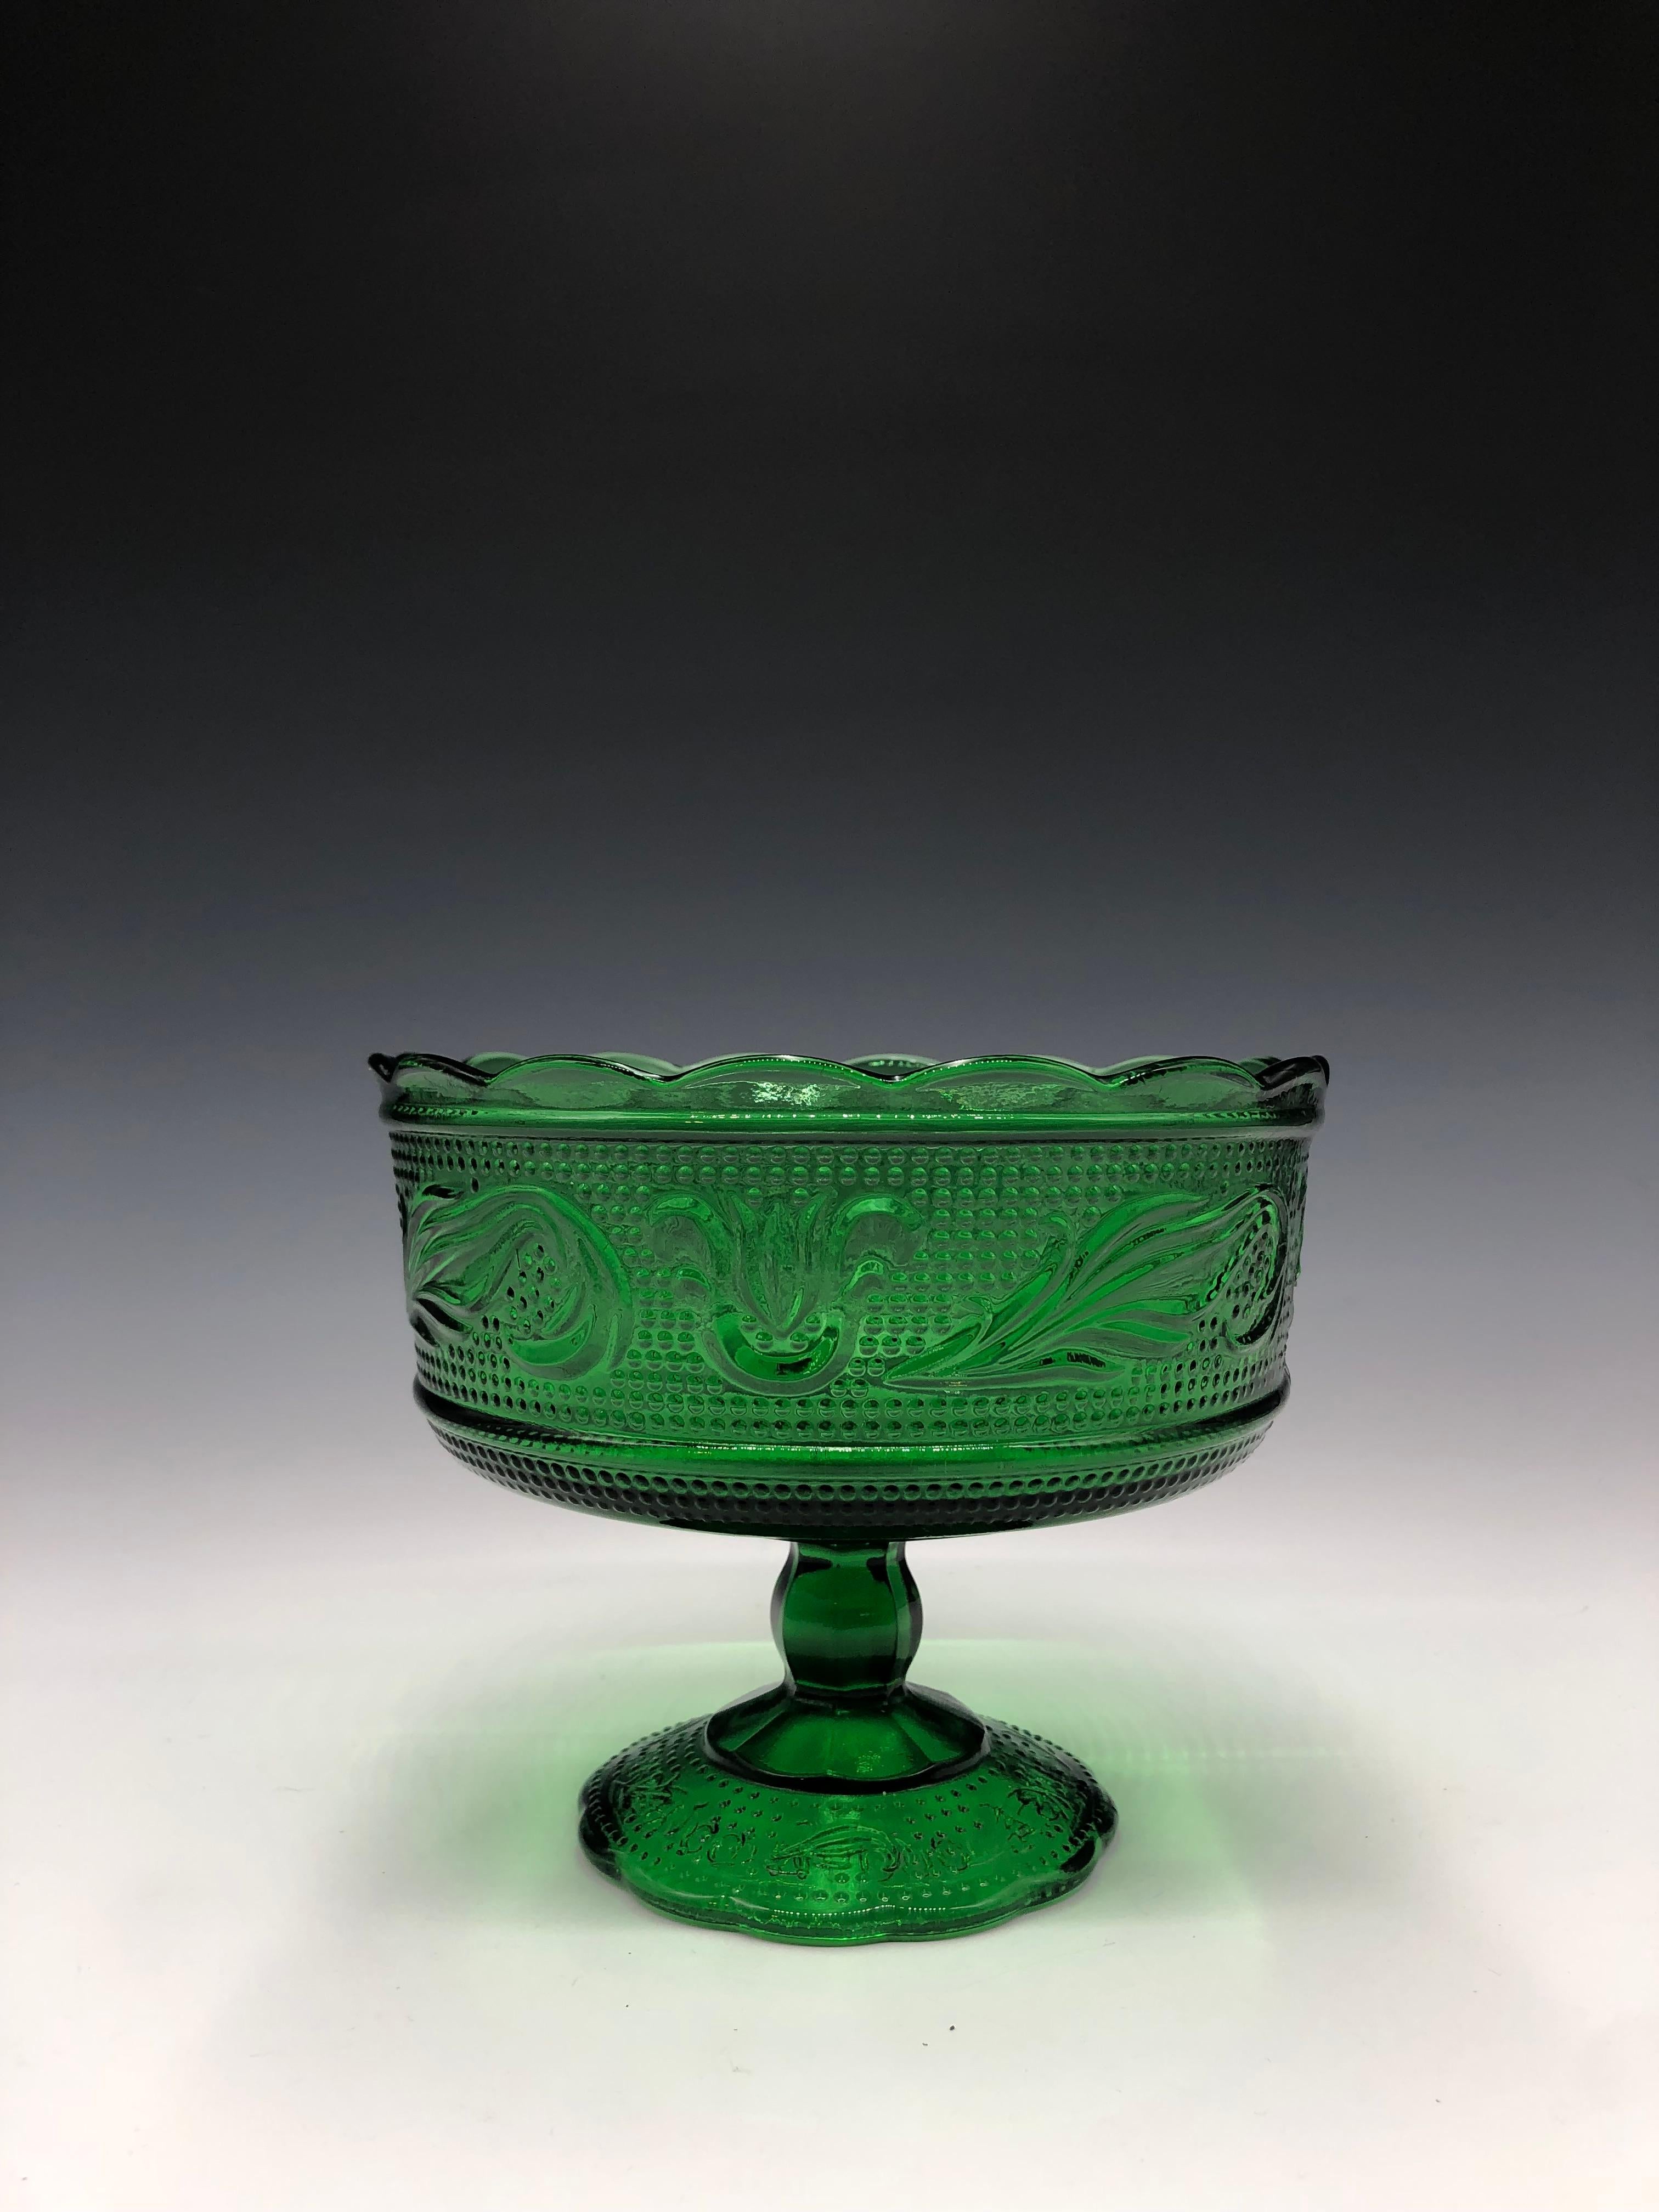 Rich emerald green mid-century modern E. O. Brody Co. pressed Glass Candy / Compote Dish with thick Dutch Floral tulip and leaf pattern and ruffle rim. Made in Cleveland, Ohio, Model M6000.

Size: 5.5